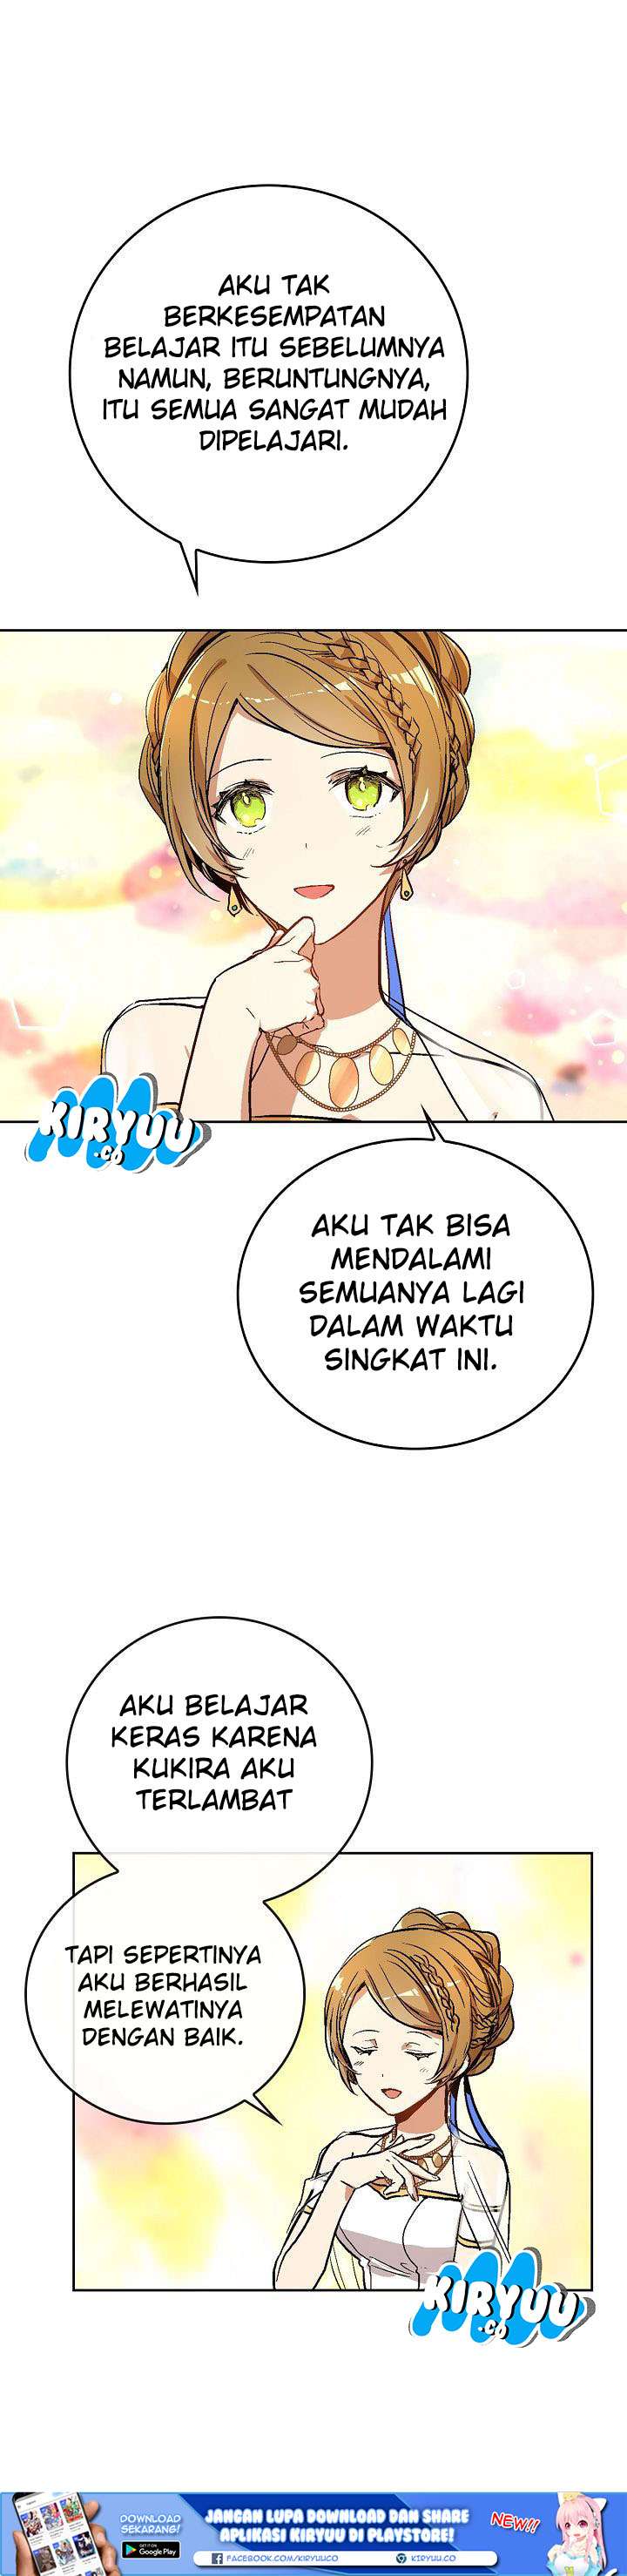 The Reason Why Raeliana Ended Up at the Duke’s Mansion Chapter 17 Bahasa Indonesia